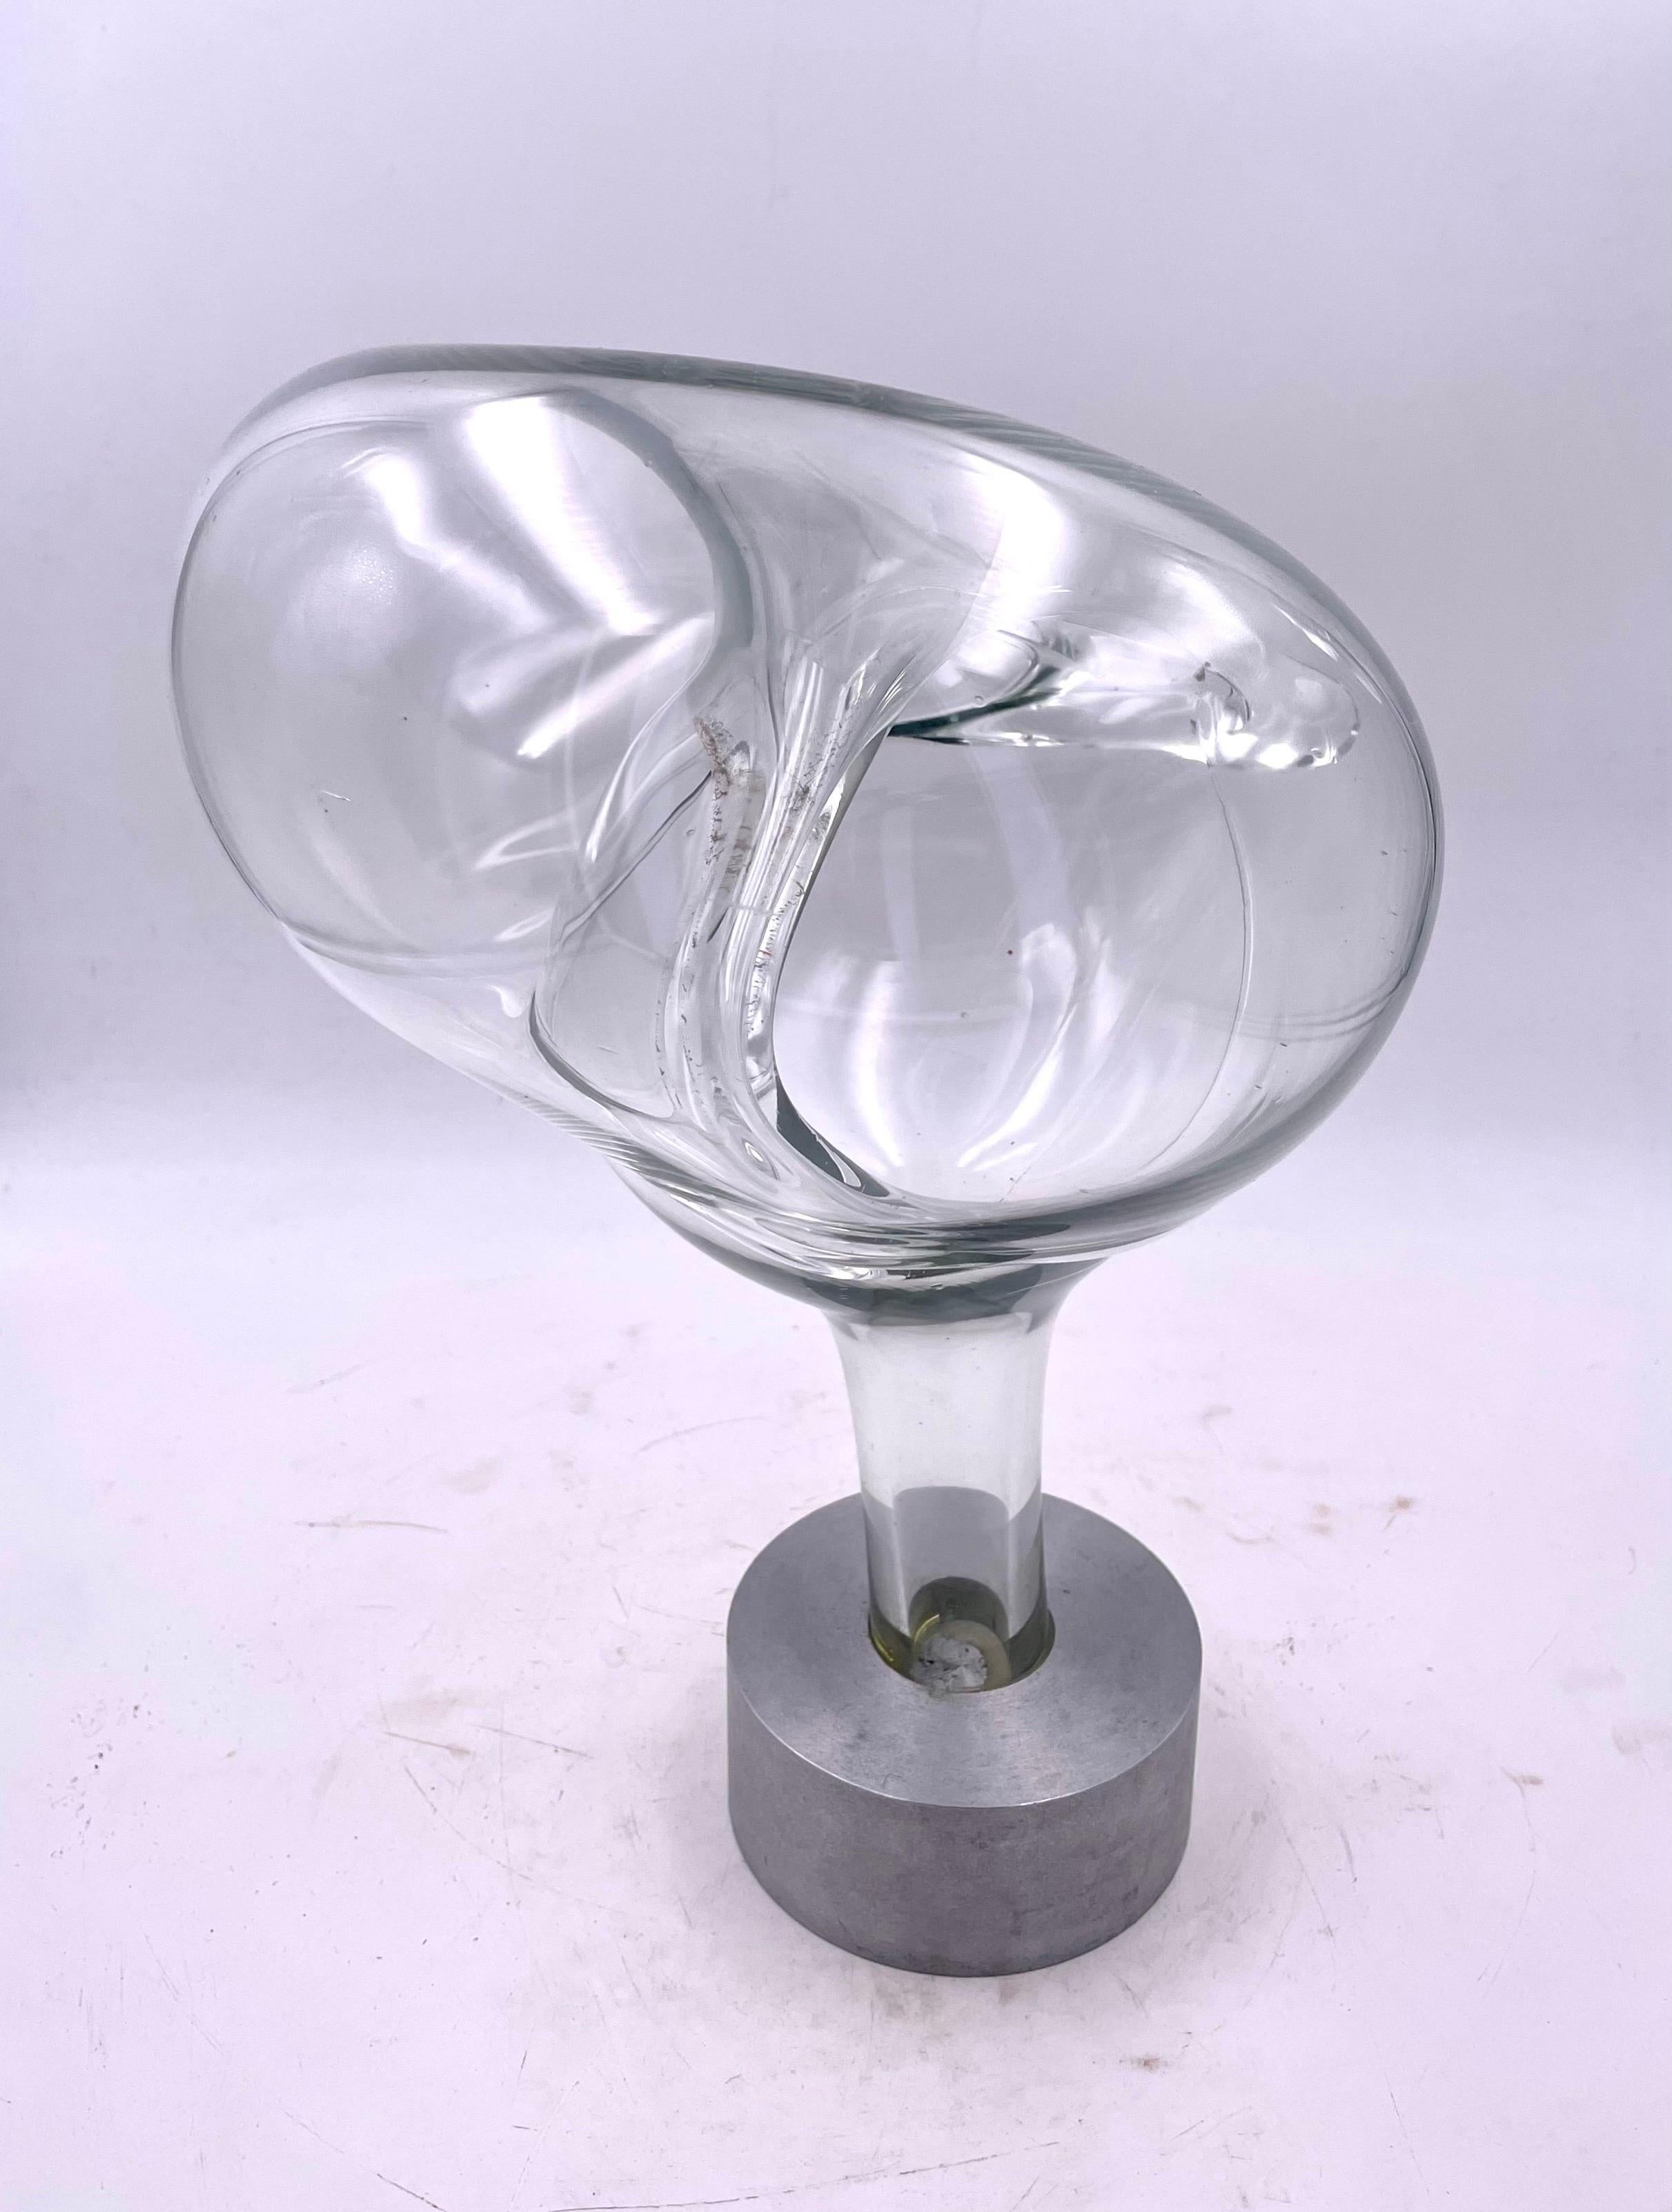 Mid-Century Modern  Biomorphic Glass & Aluminium Sculpture by John Bingham signed & Dated 1976 For Sale